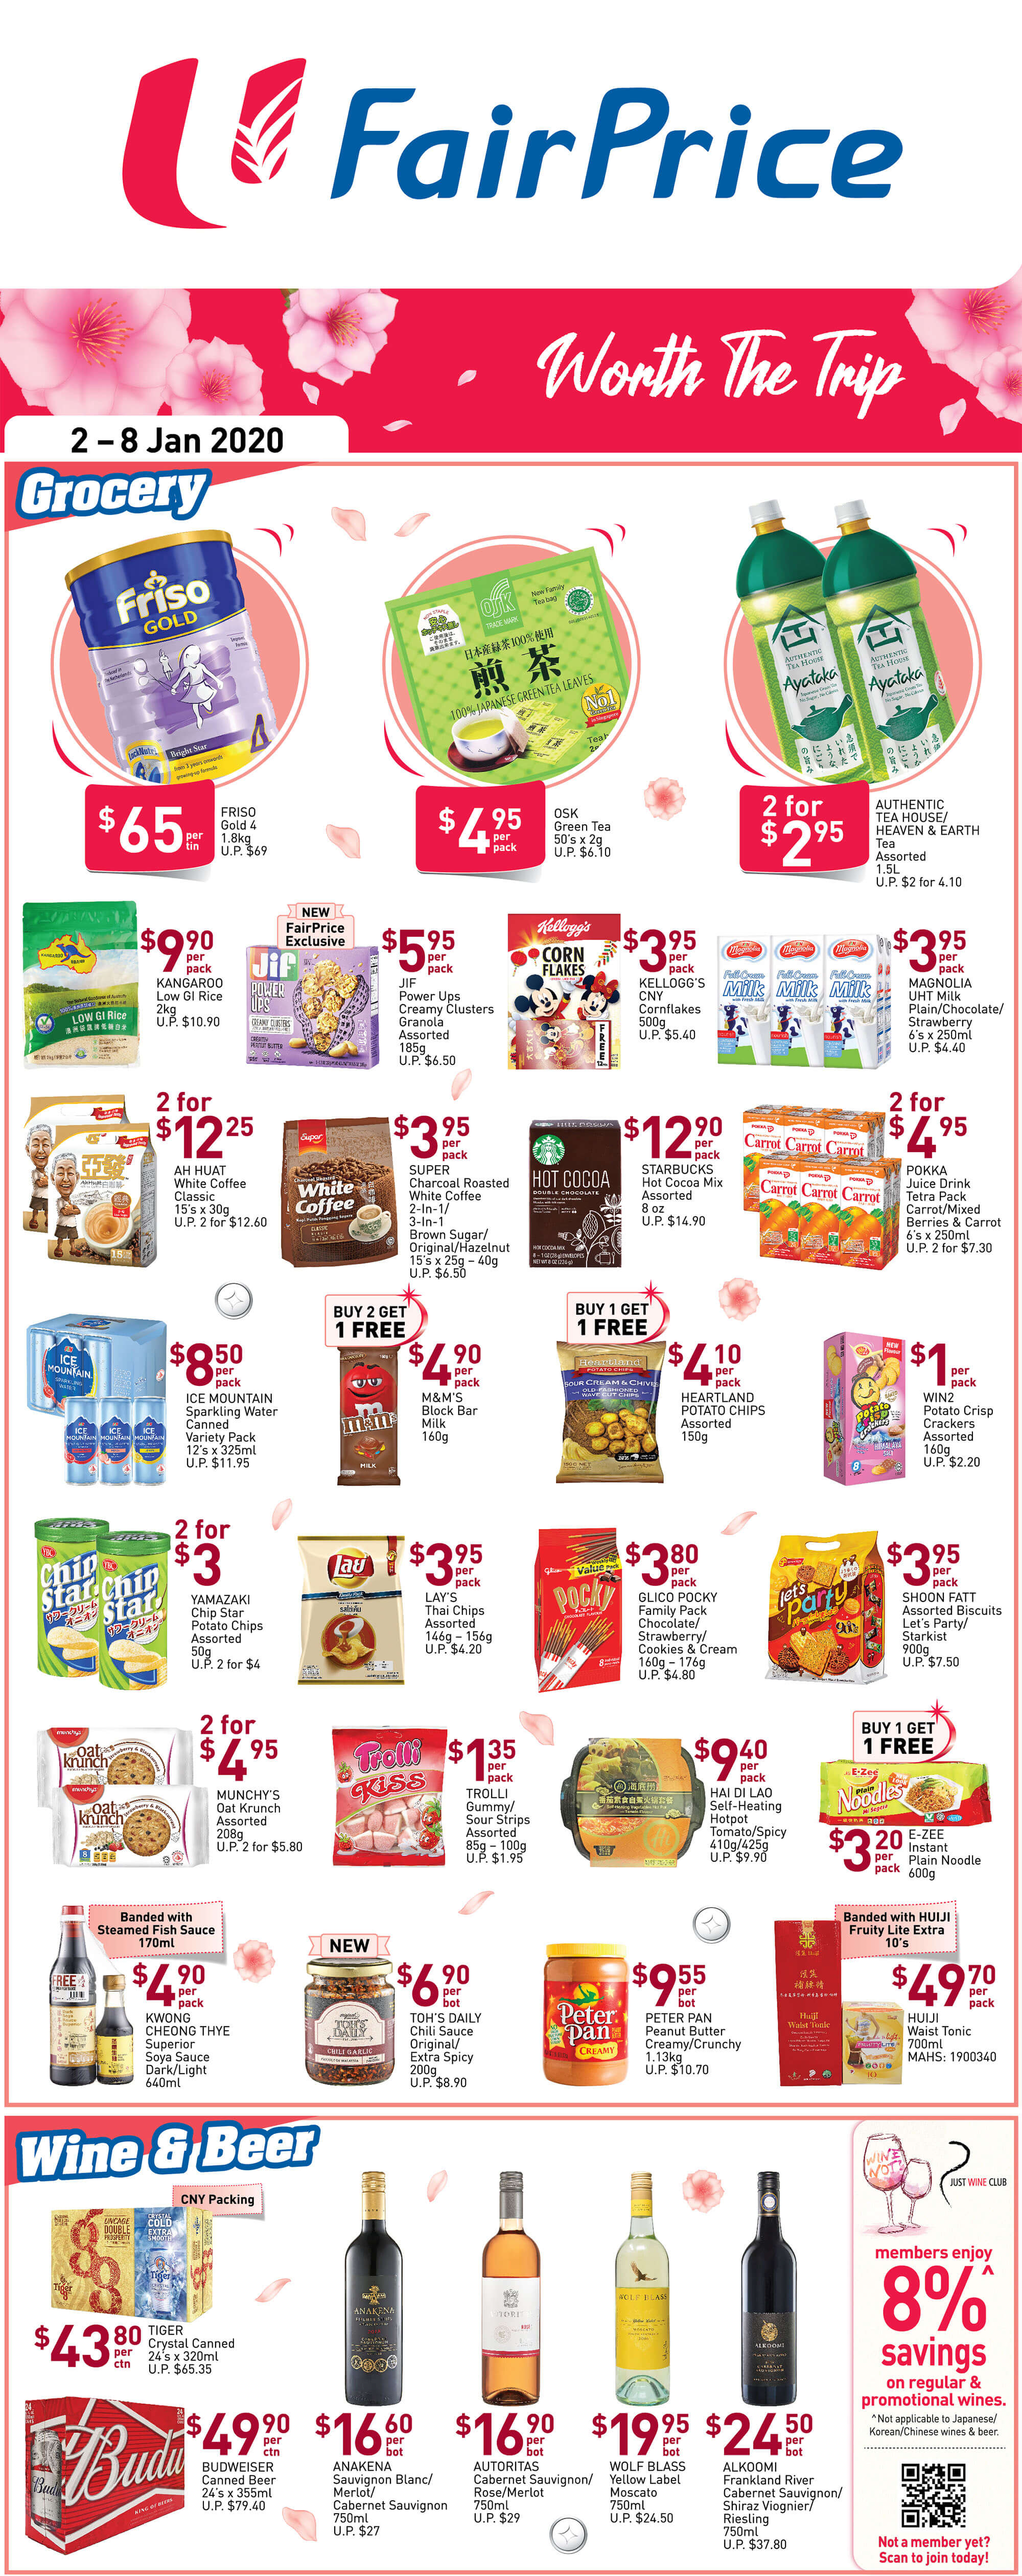 NTUC FairPrice SG Your Weekly Saver Promotions 2-8 Jan 2020 | Why Not Deals